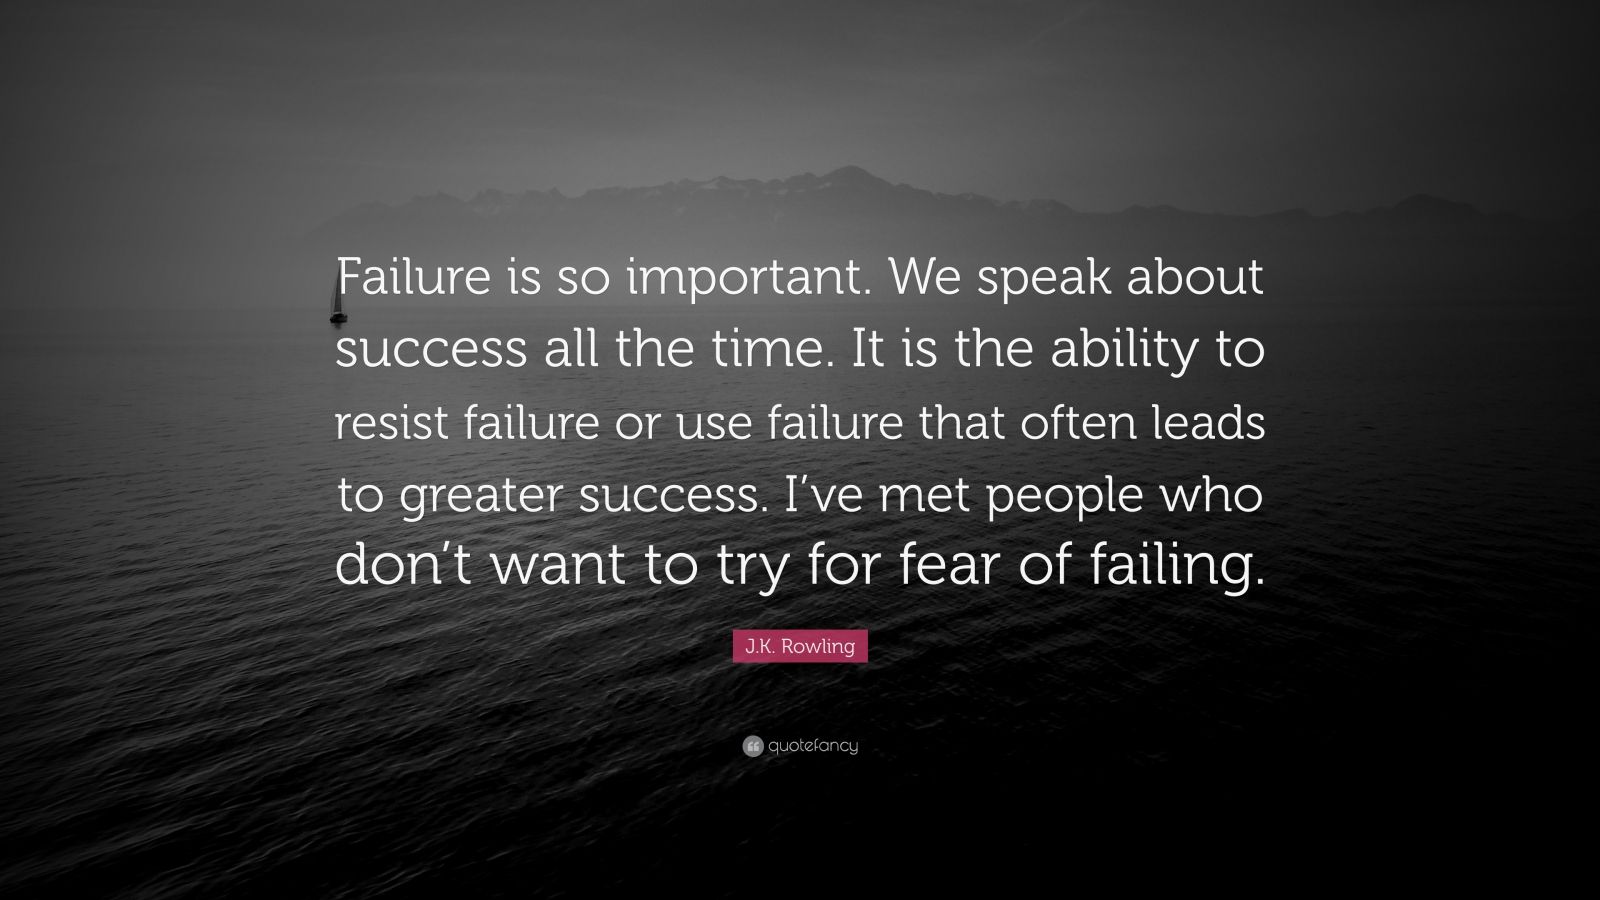 J.K. Rowling Quote: “Failure is so important. We speak about success ...